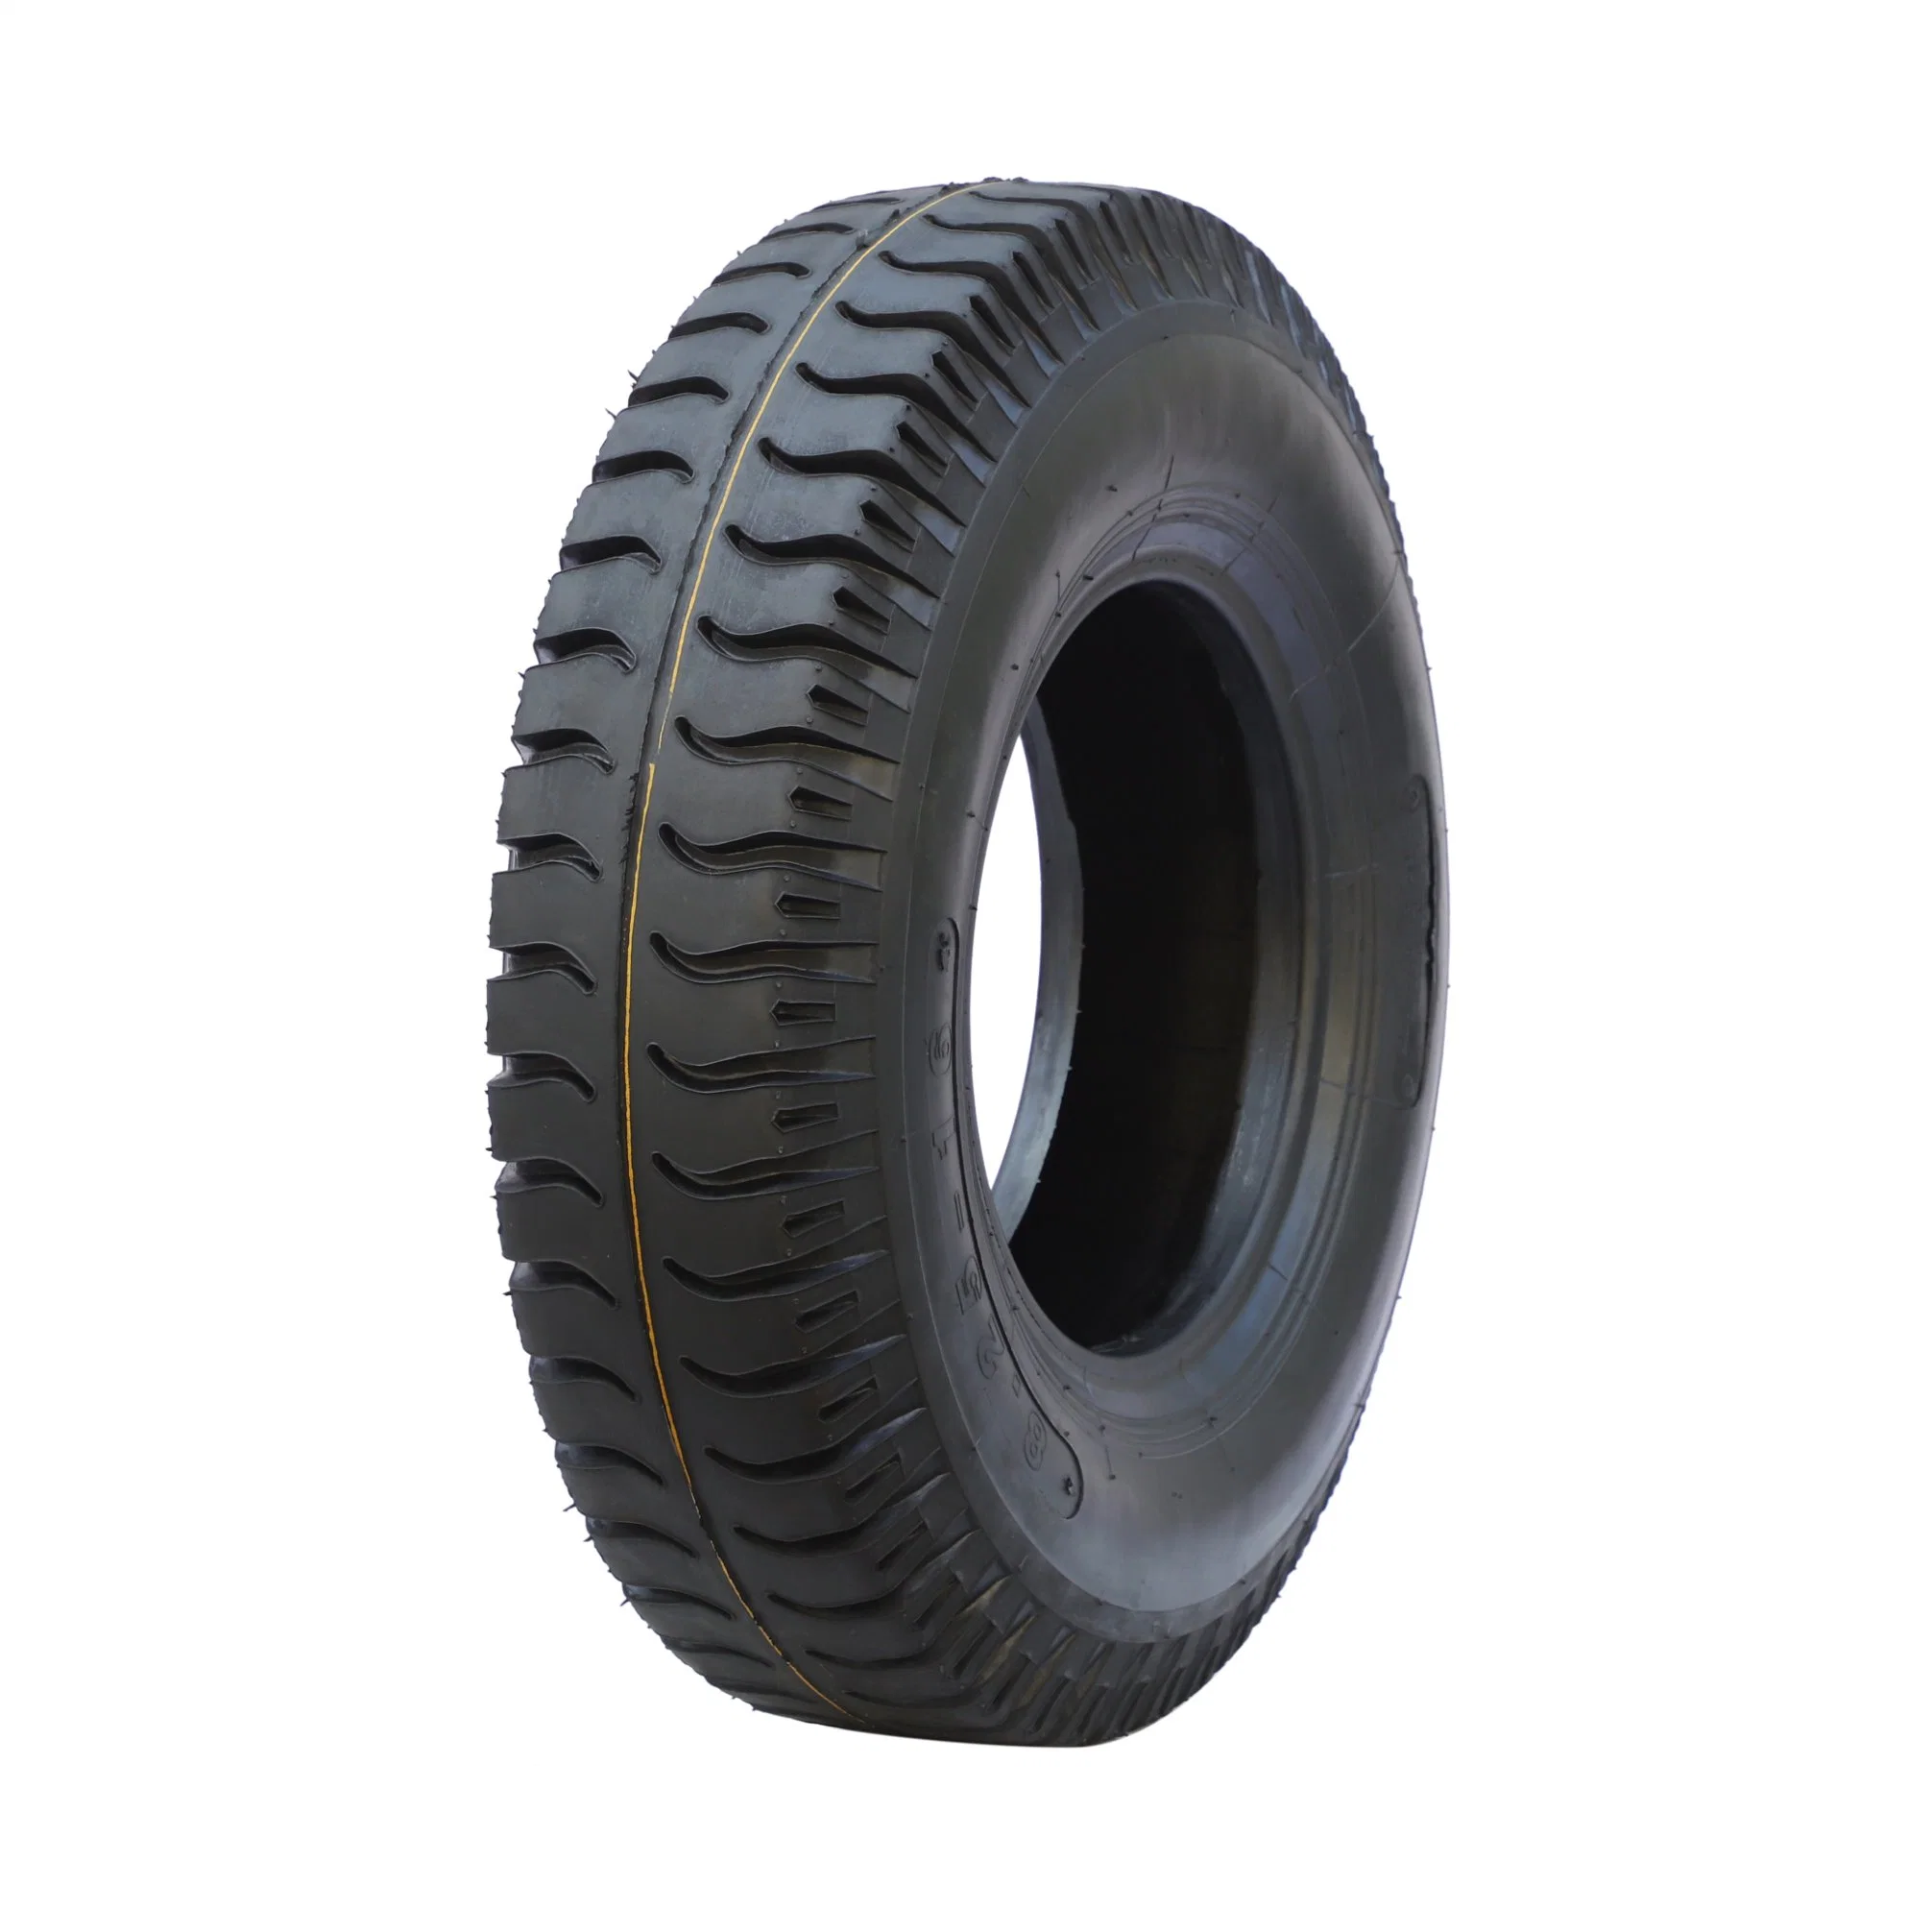 Rock King Brand 7.50-16 Construction Tire off The Road Tyre OTR Industry Tyre